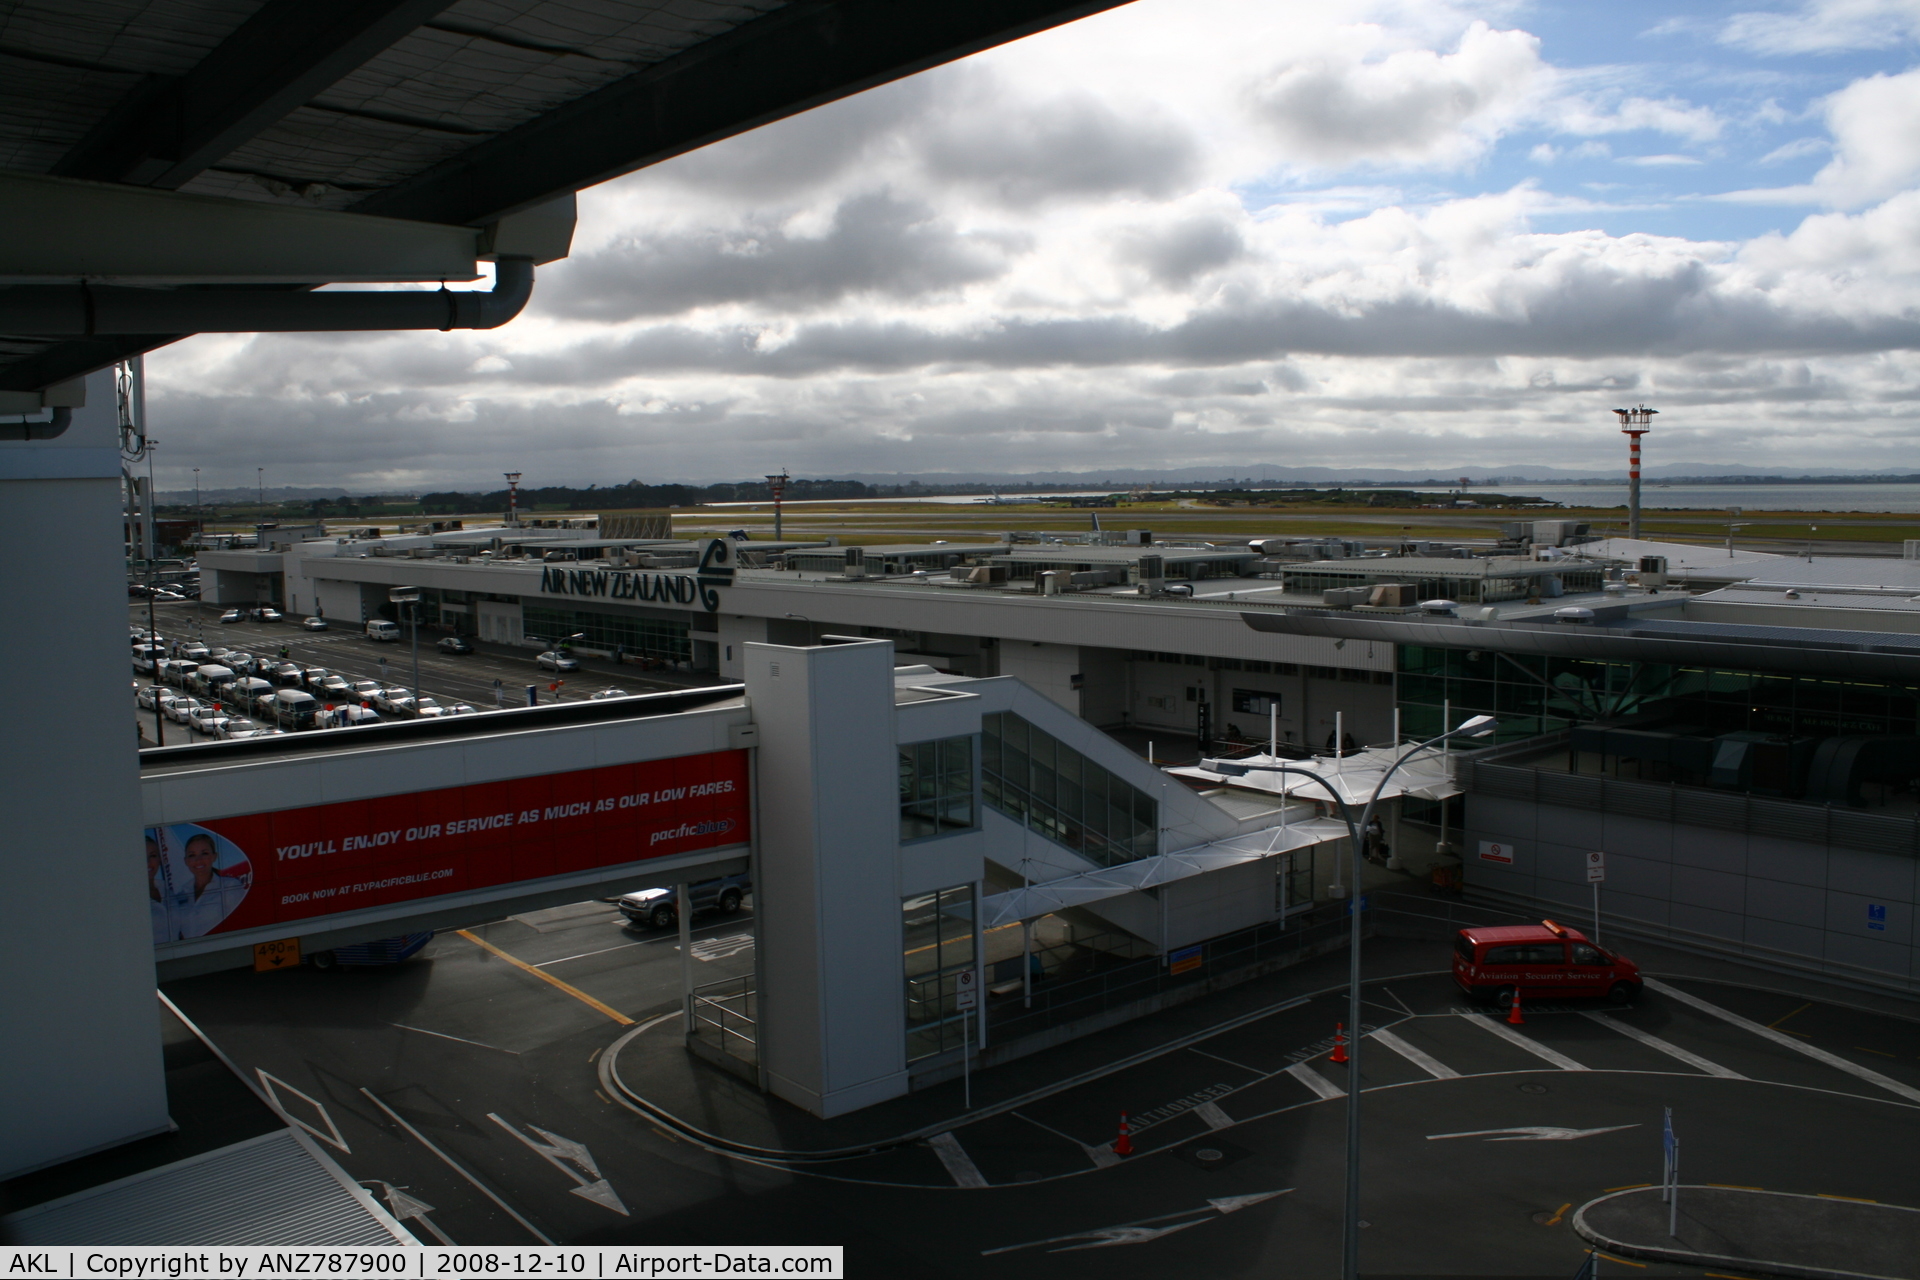 Auckland International Airport, Auckland New Zealand (AKL) - Looking at the Air NZ domestic